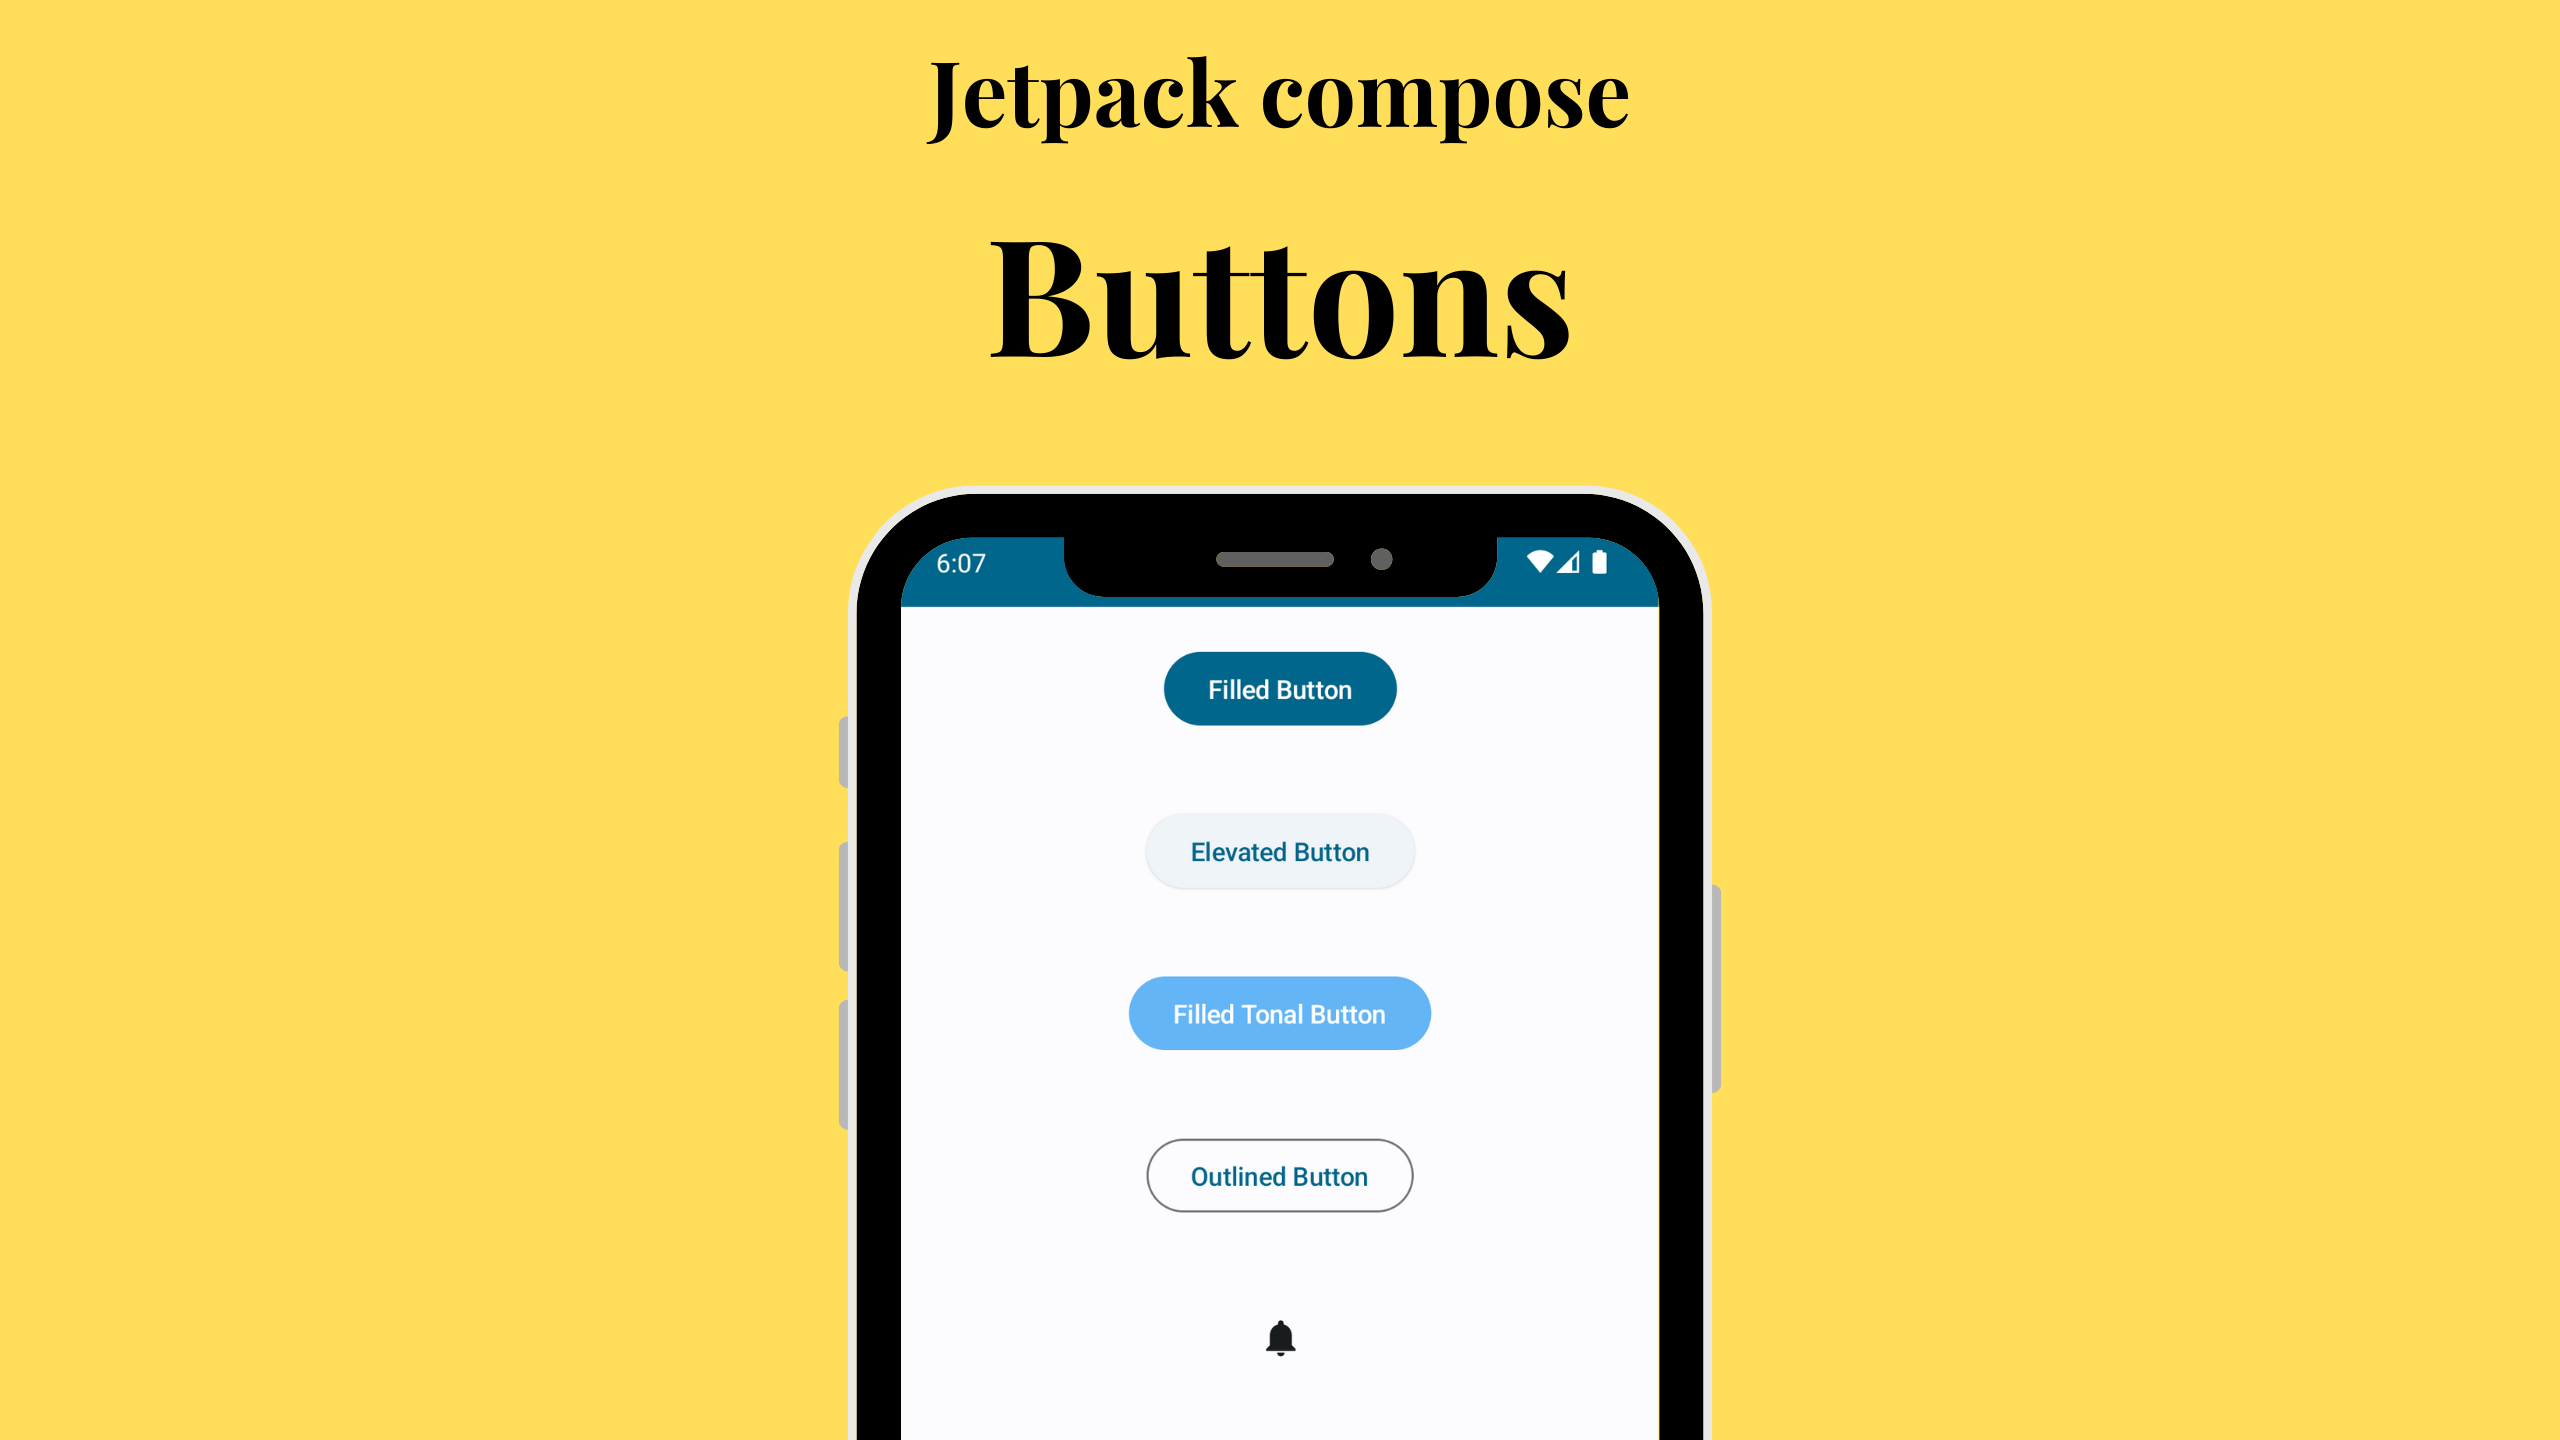 Buttons in jetpack compose